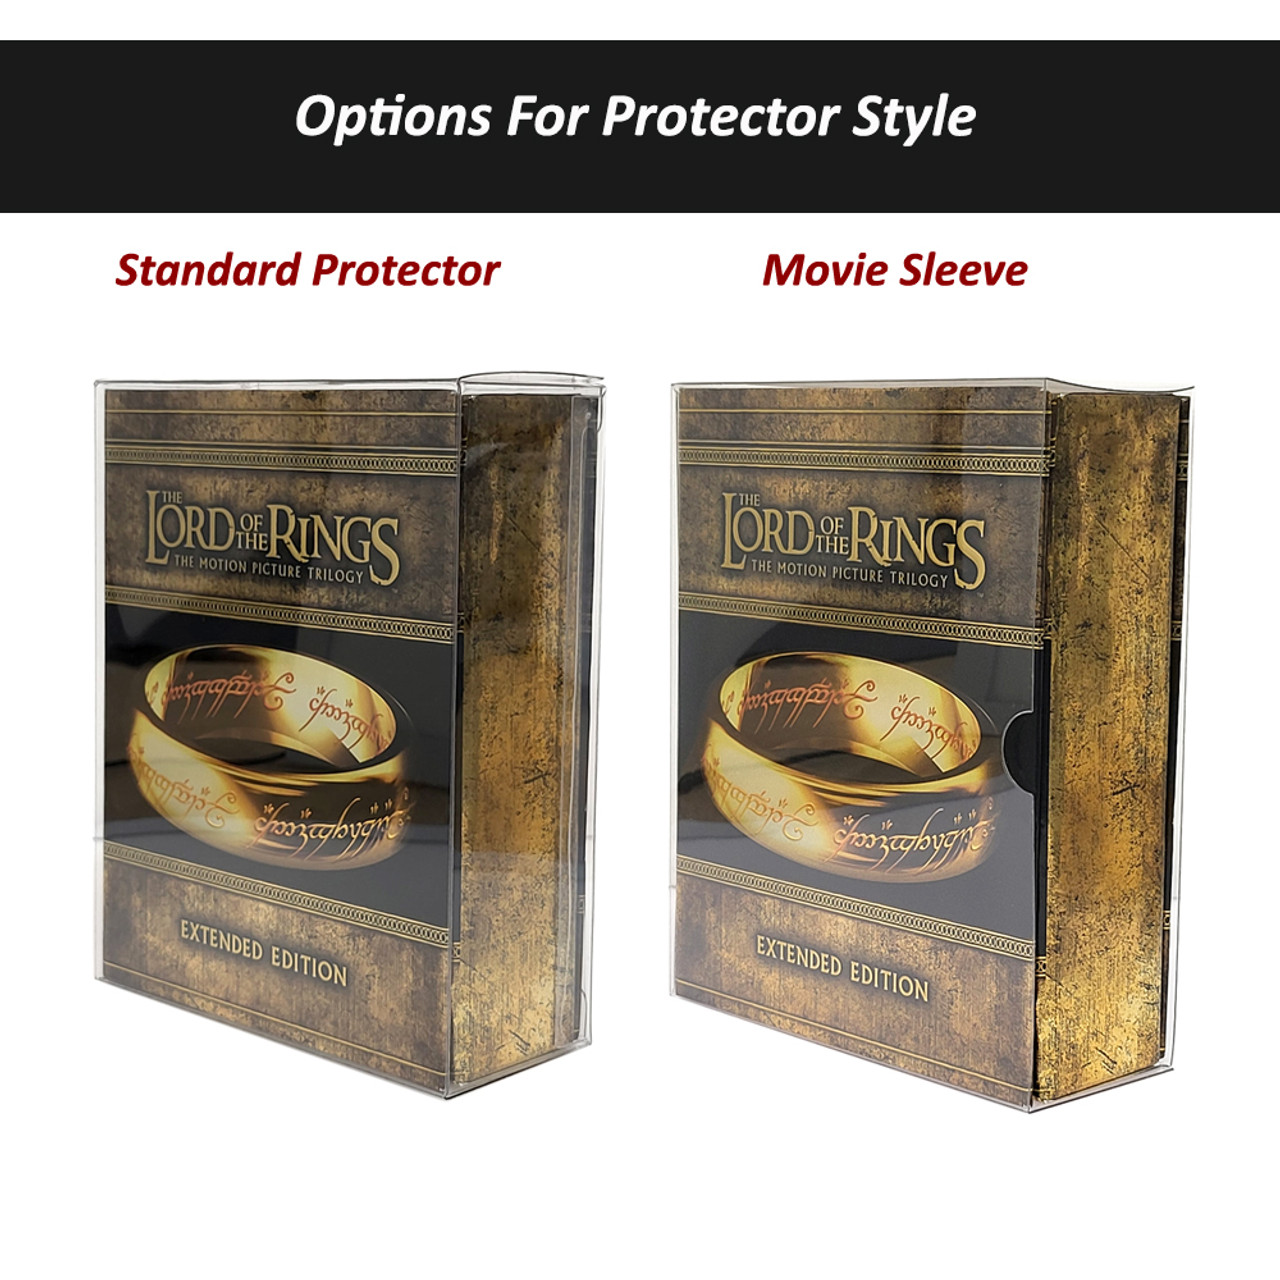 Protector For The Labyrinth 4K - 35th Anniversary Edition Oversize Slipbox